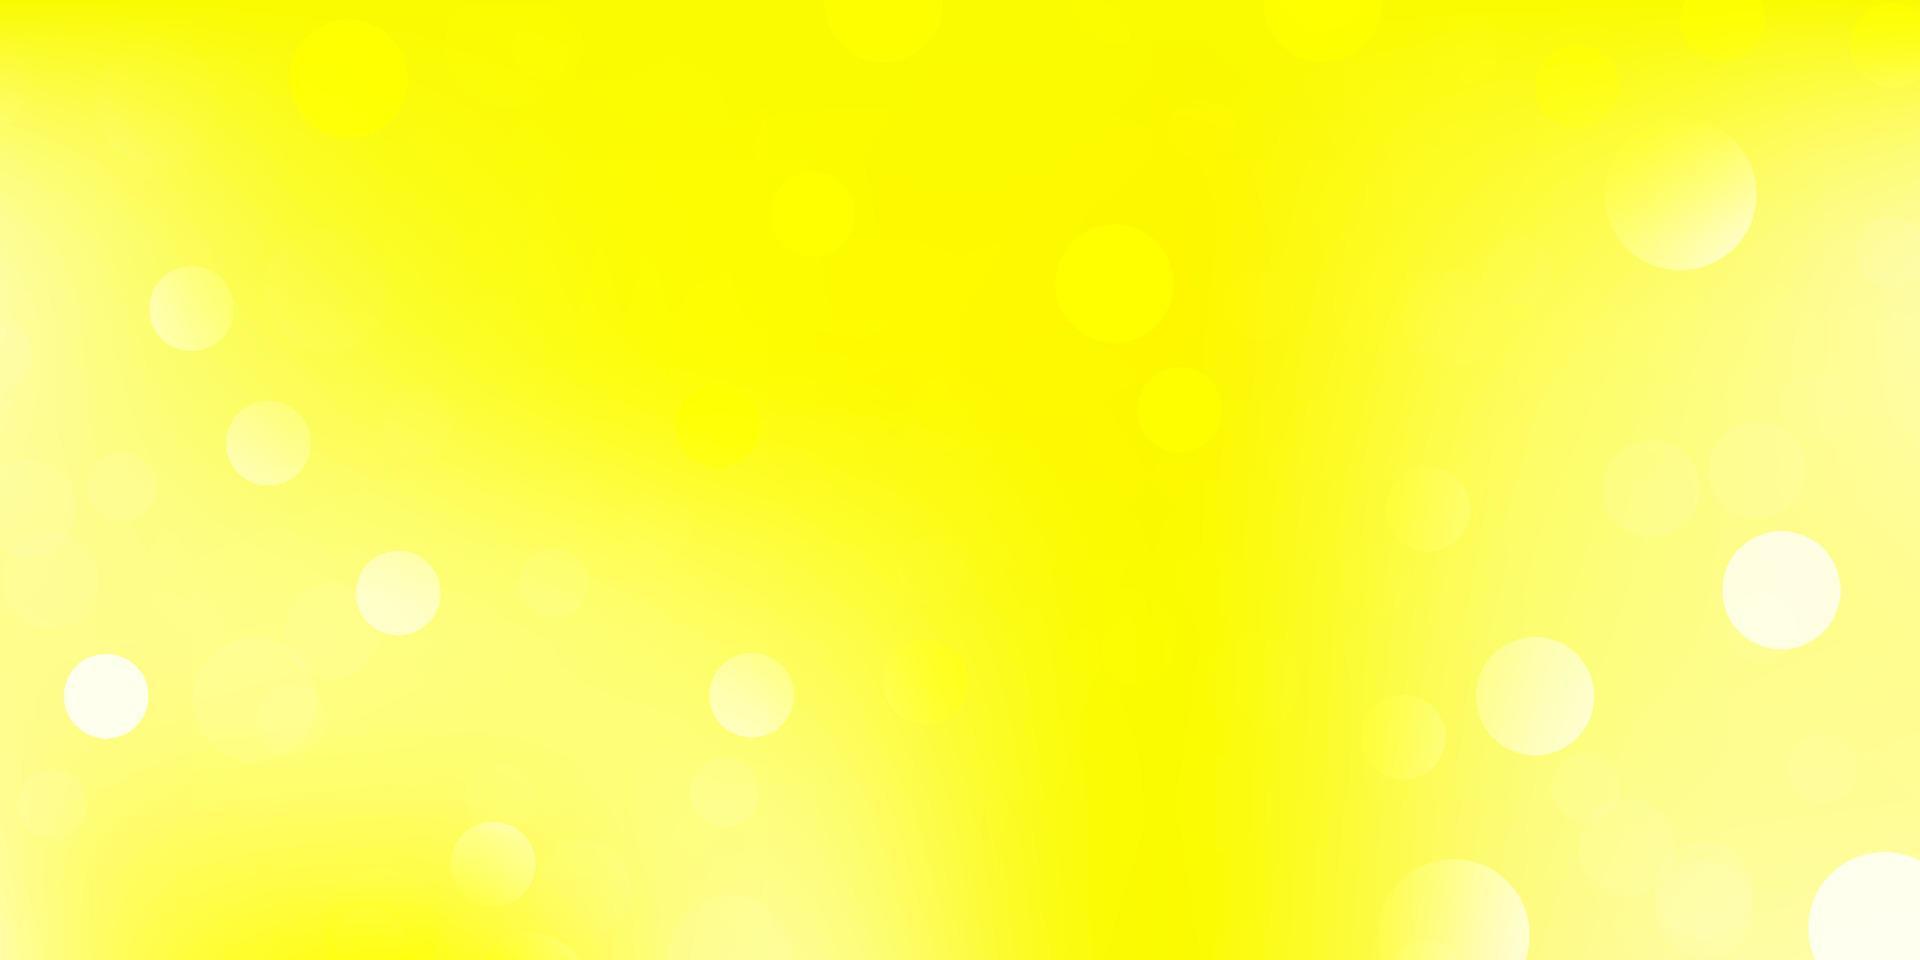 Light yellow vector texture with disks.